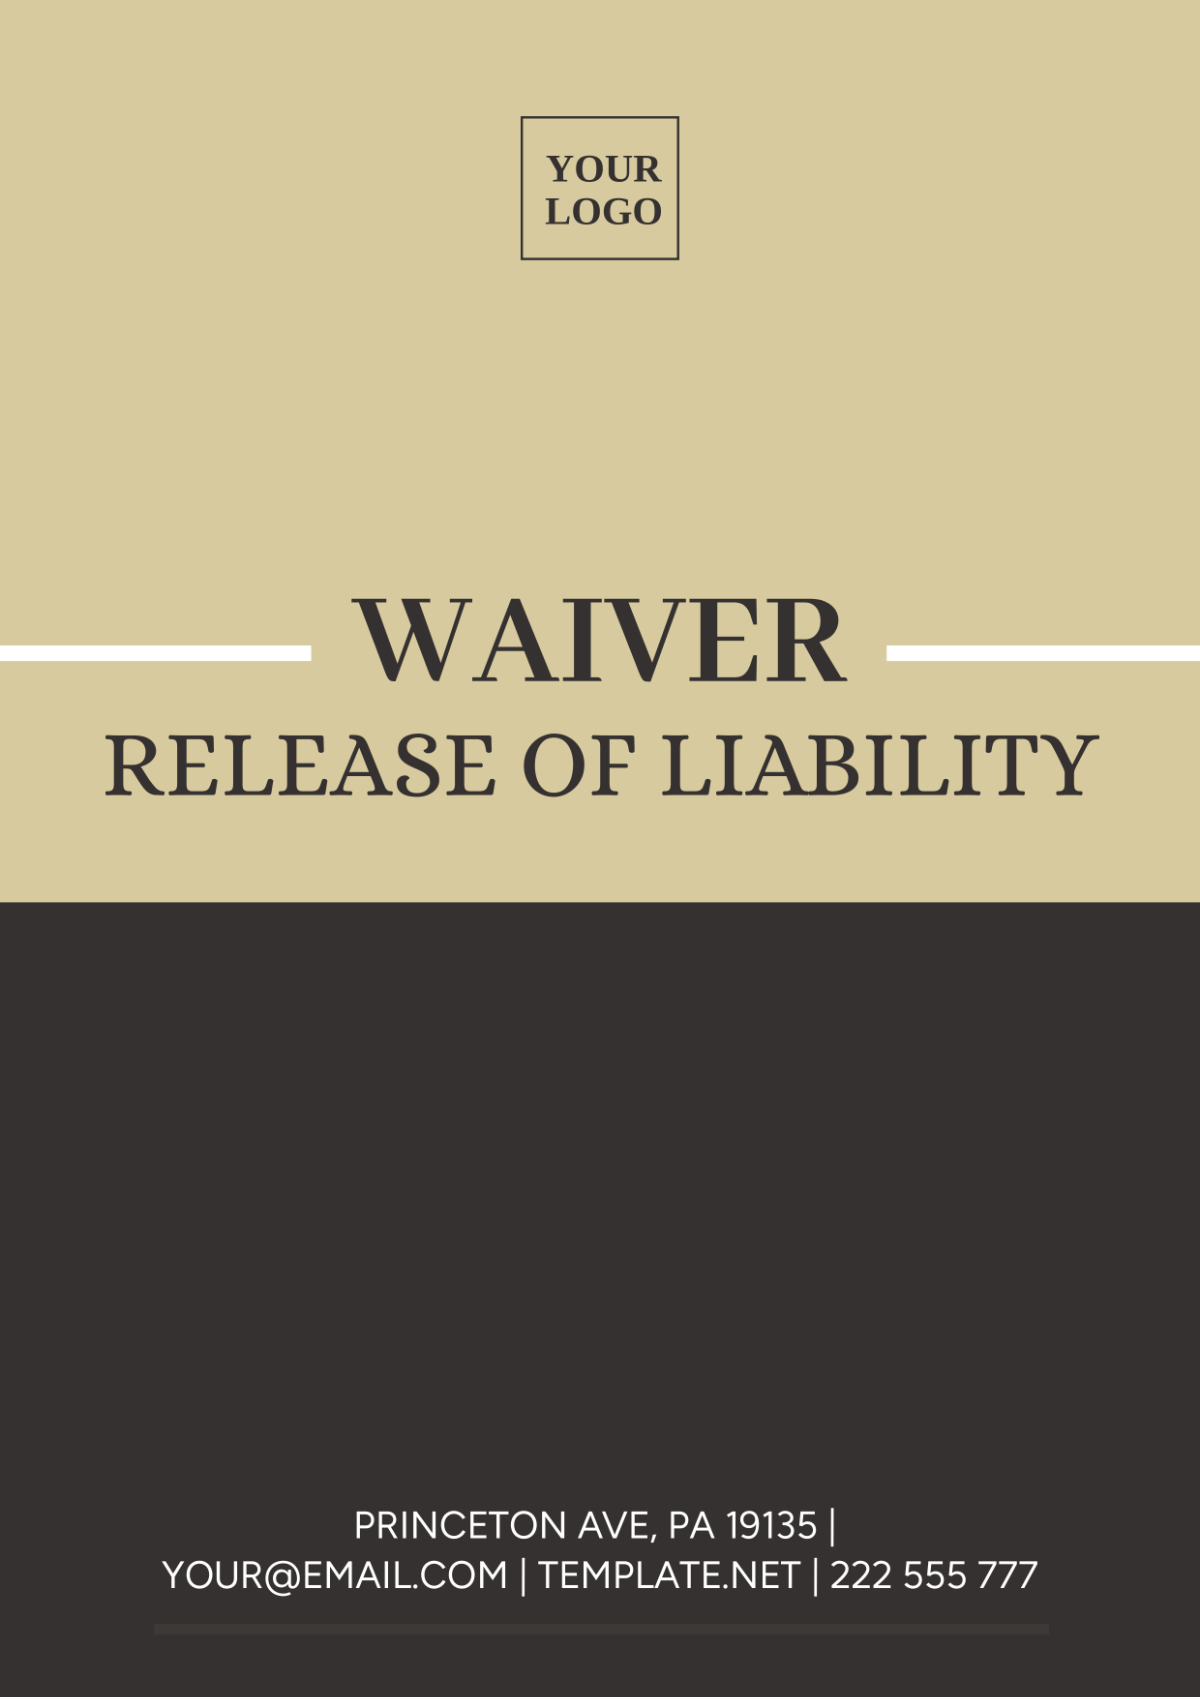 Waiver Release of Liability Template